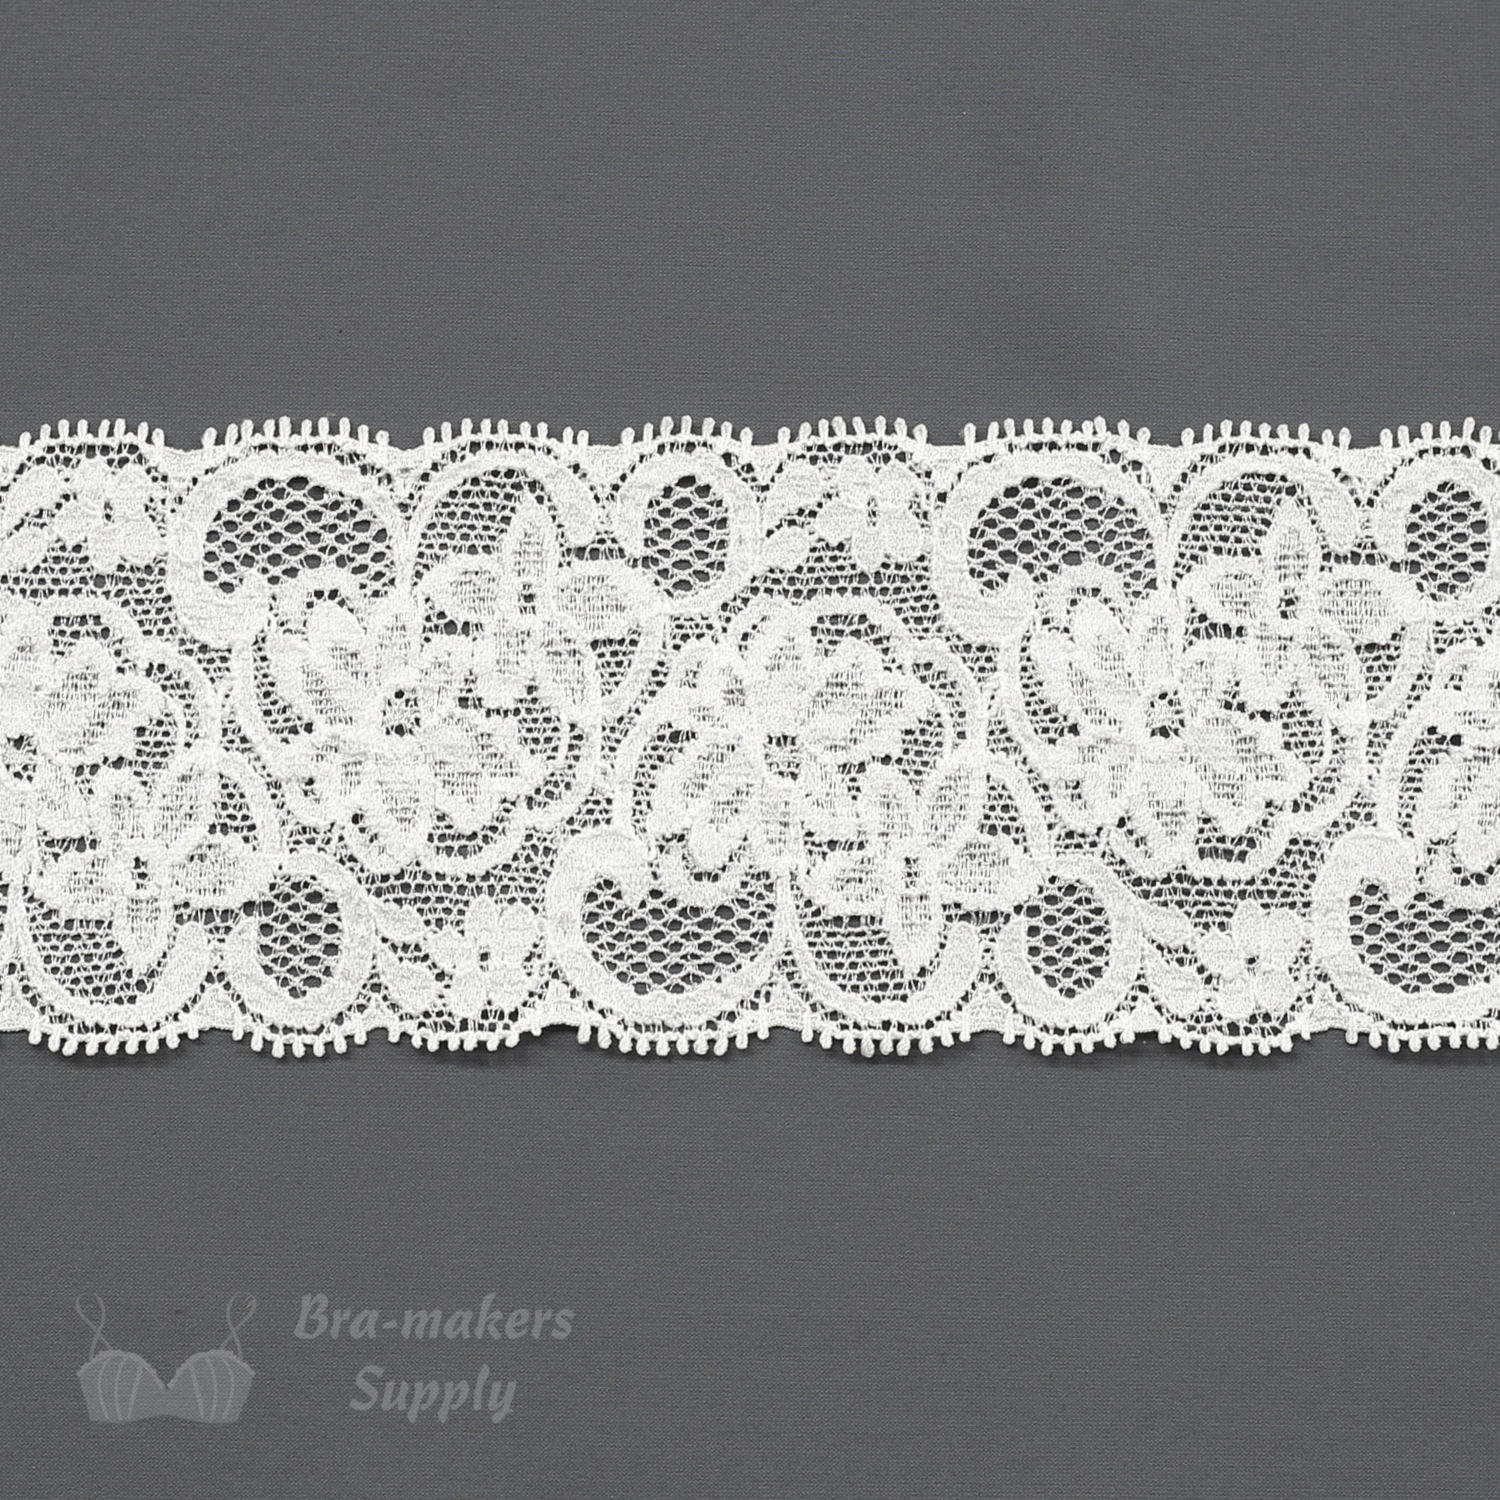 Flat, By Style, Galloon 4-12 Inches Wide - Lace